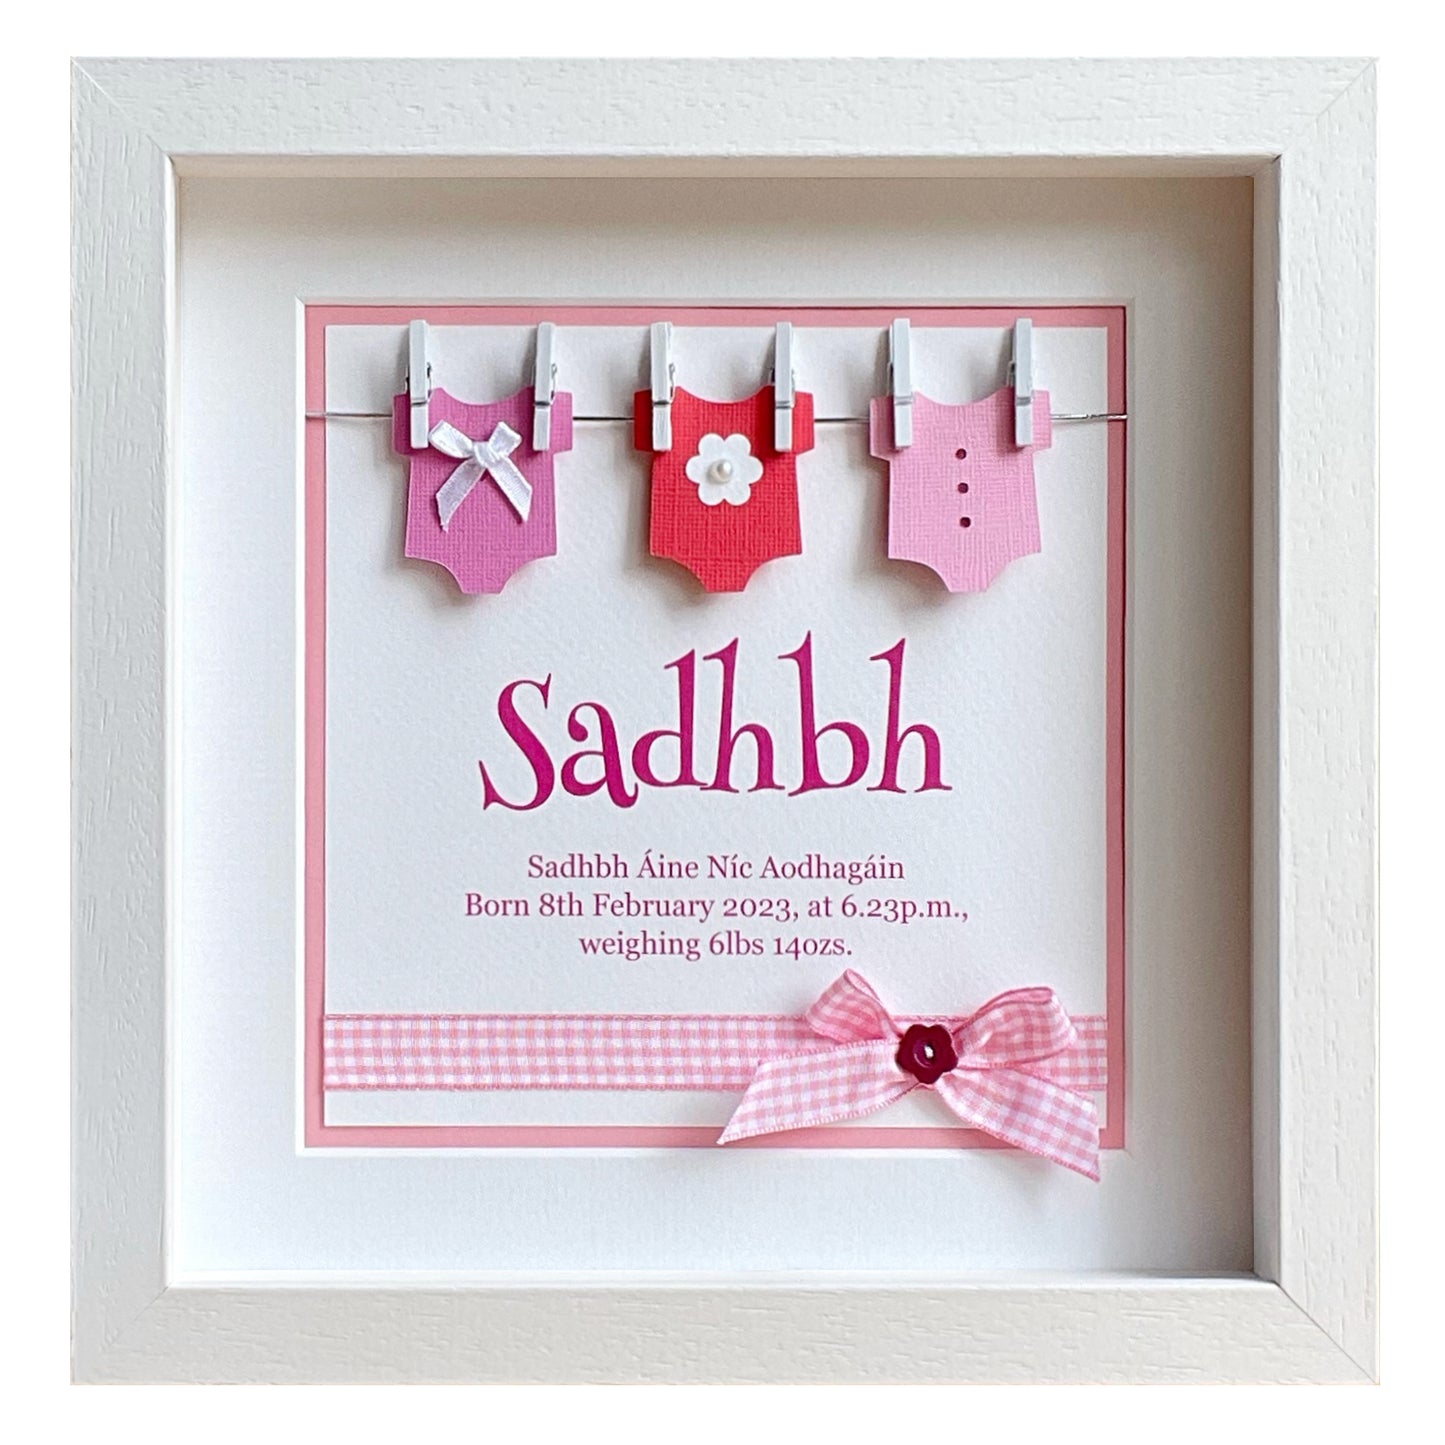 Baby girl's vests handmade gift frame (Personalised & Made to order)